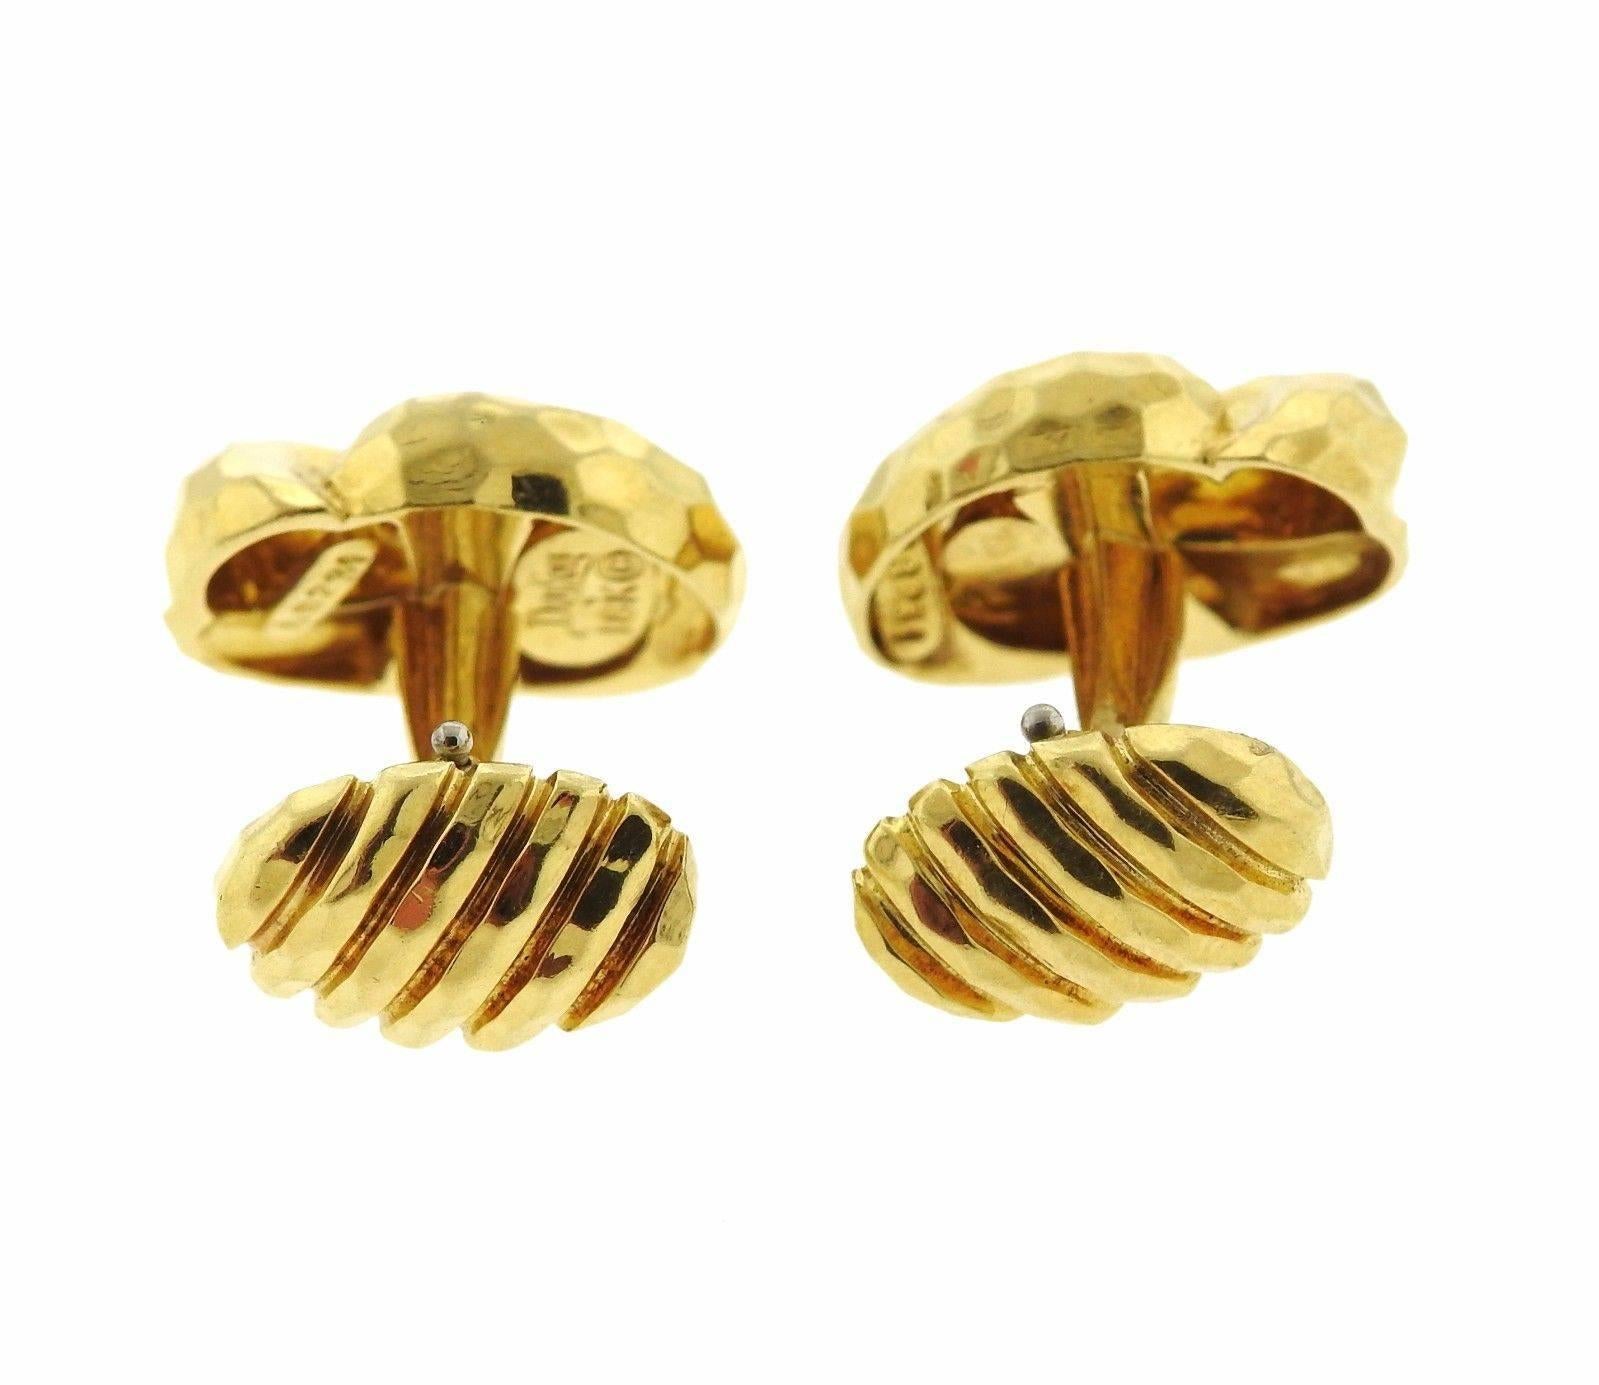 Henry Dunay Hammered Gold Knot Cufflinks 1